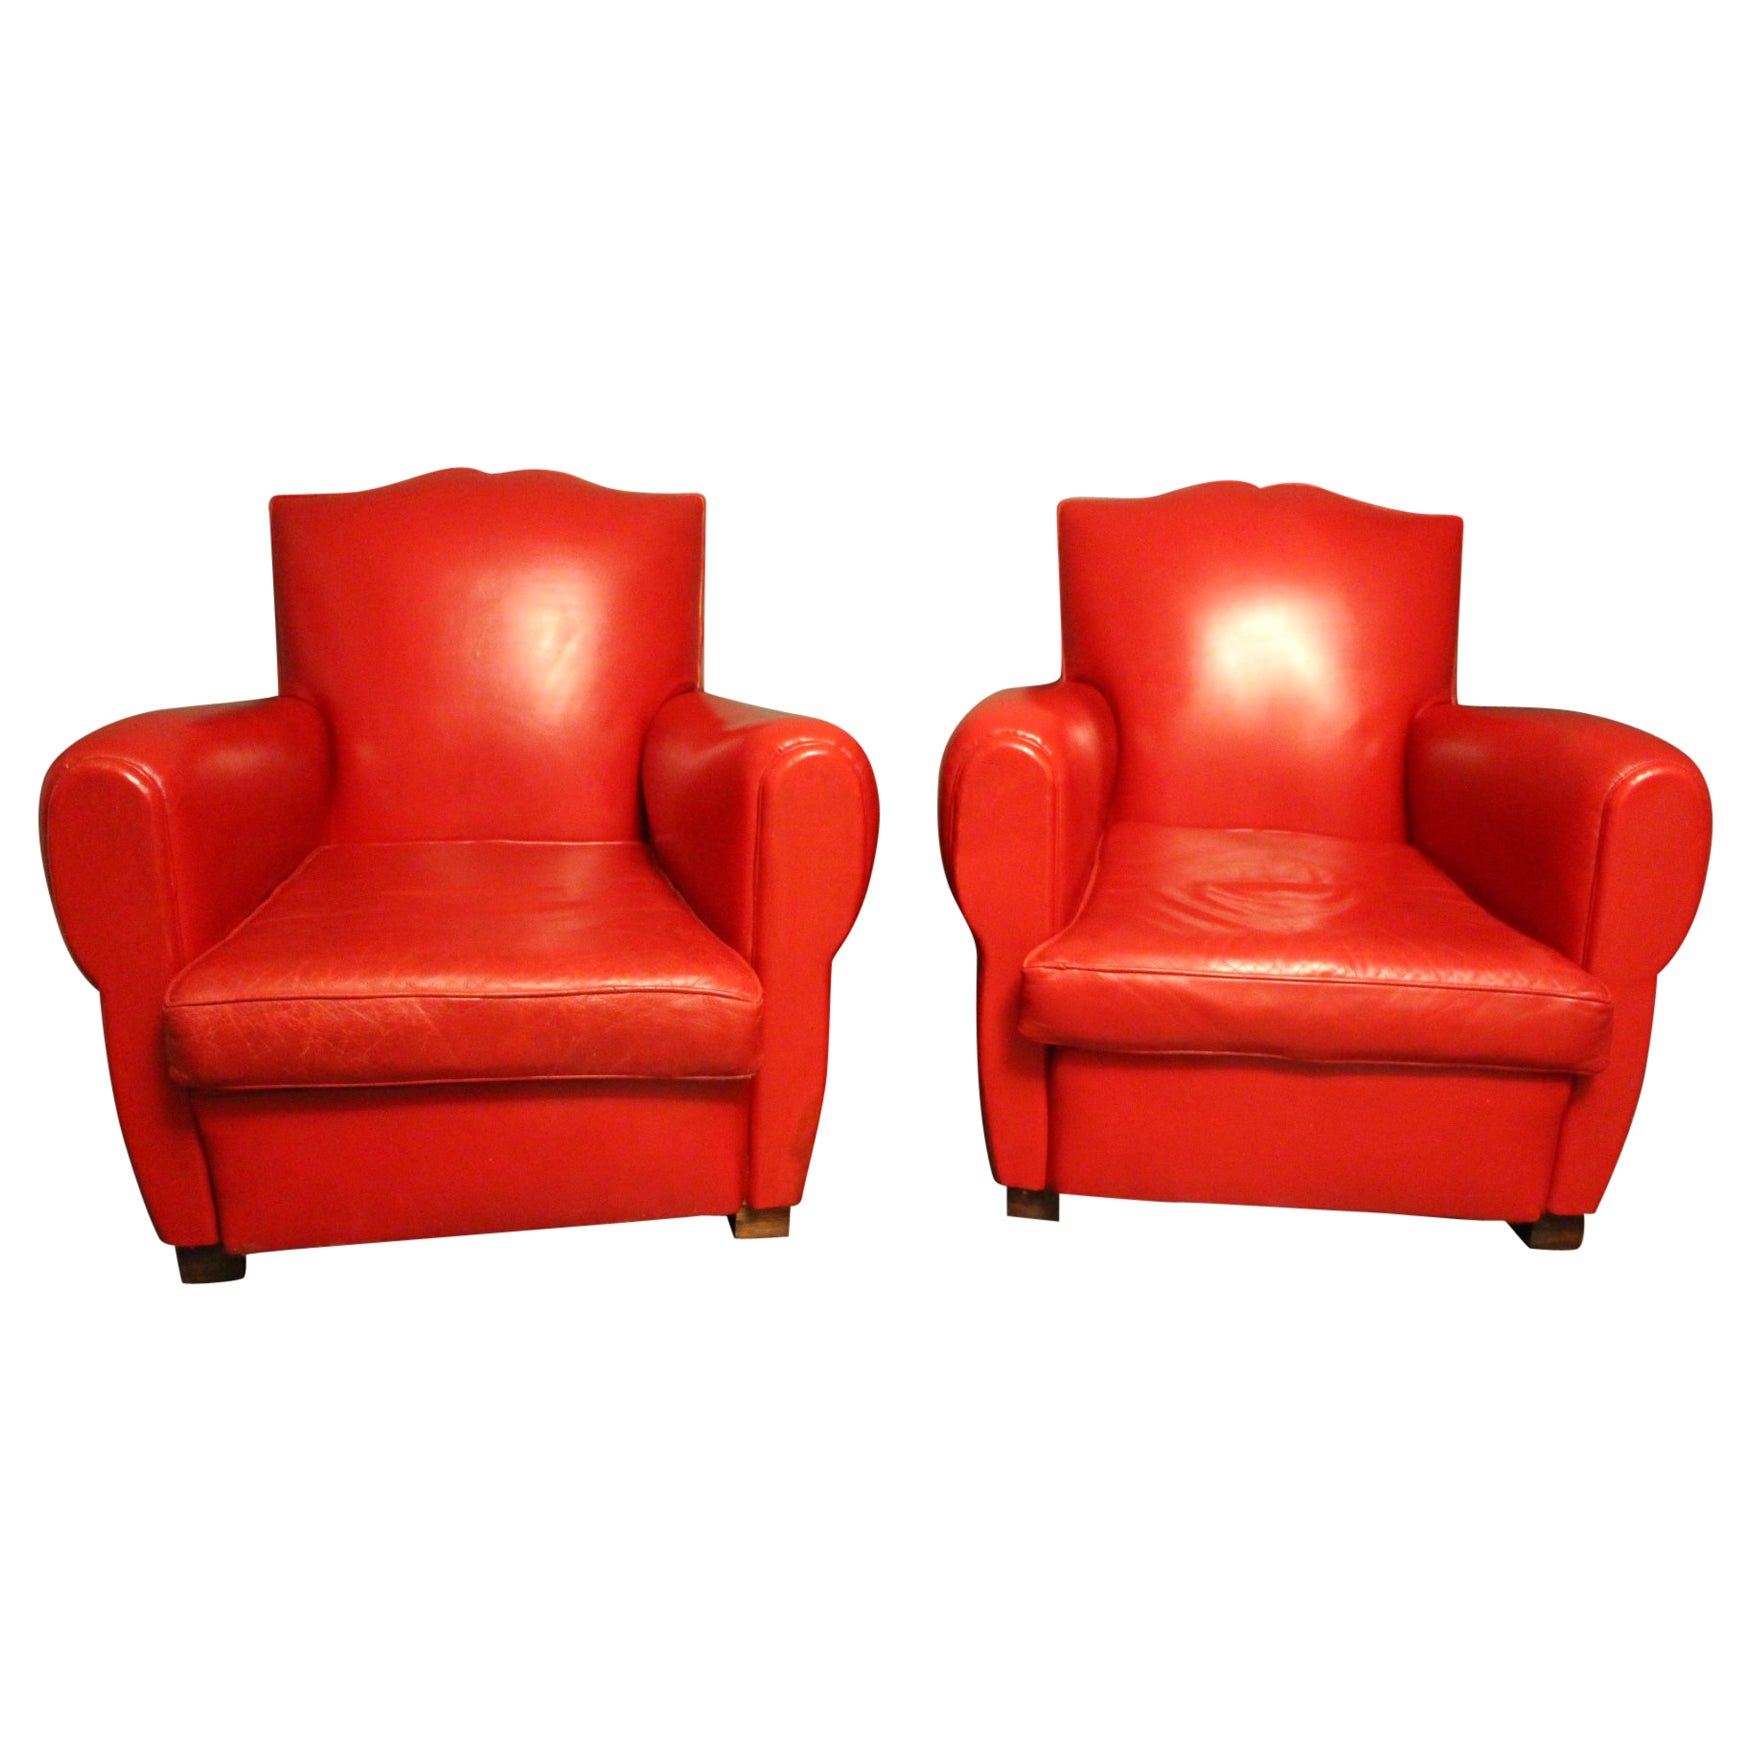 Pair Of French Art Deco Leather Club Chairs At 1stdibs